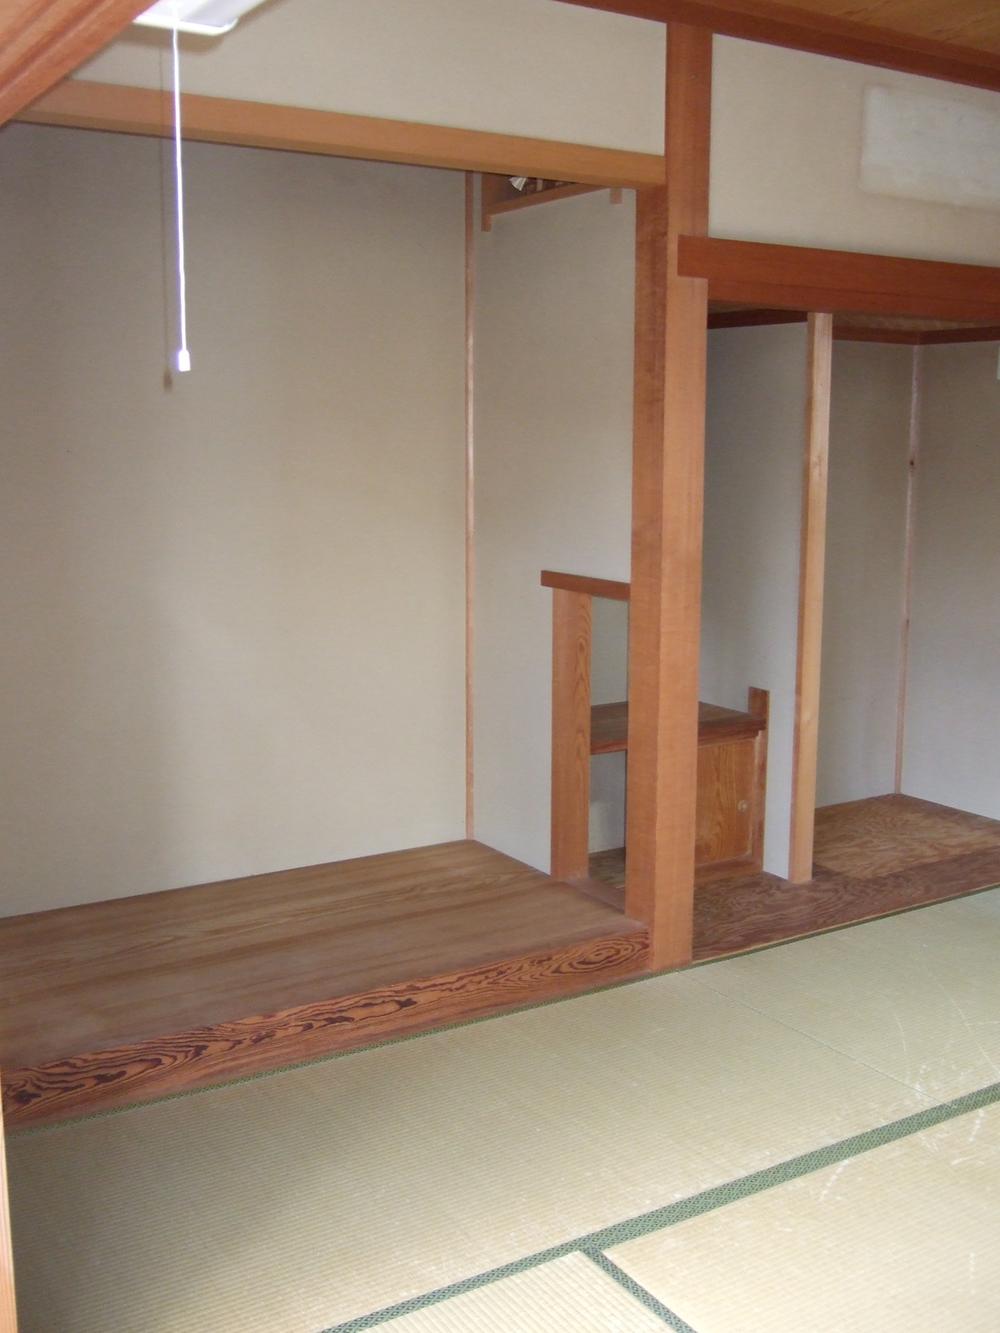 Other introspection. First floor 8 quires of Japanese-style room